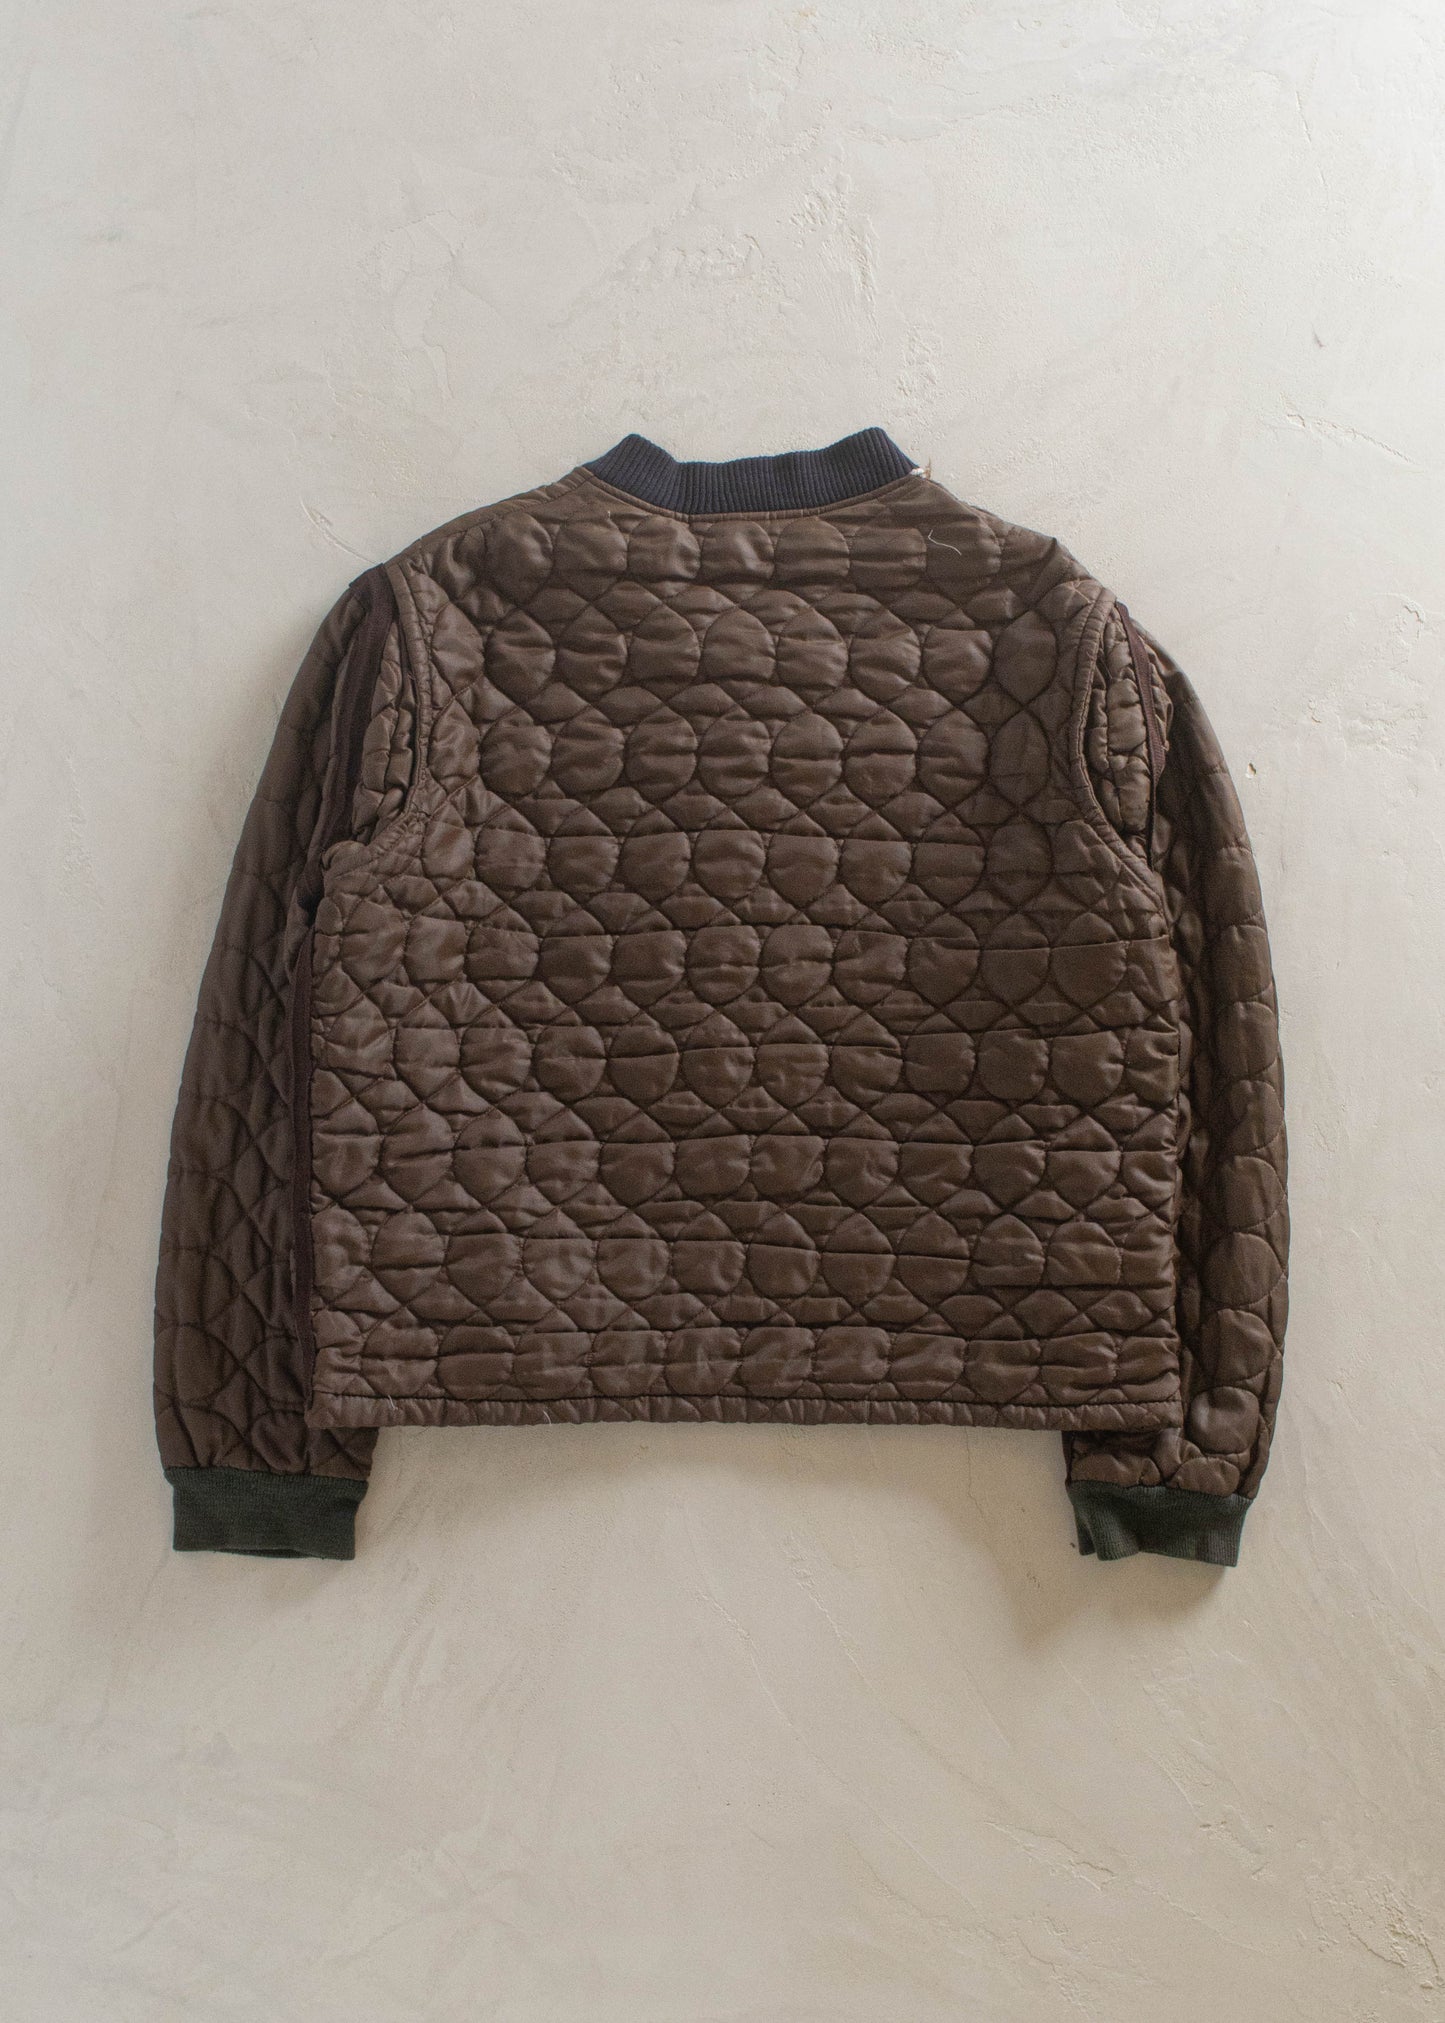 1980s I Likalai Sportswear Quilted Liner Jacket Size M/L